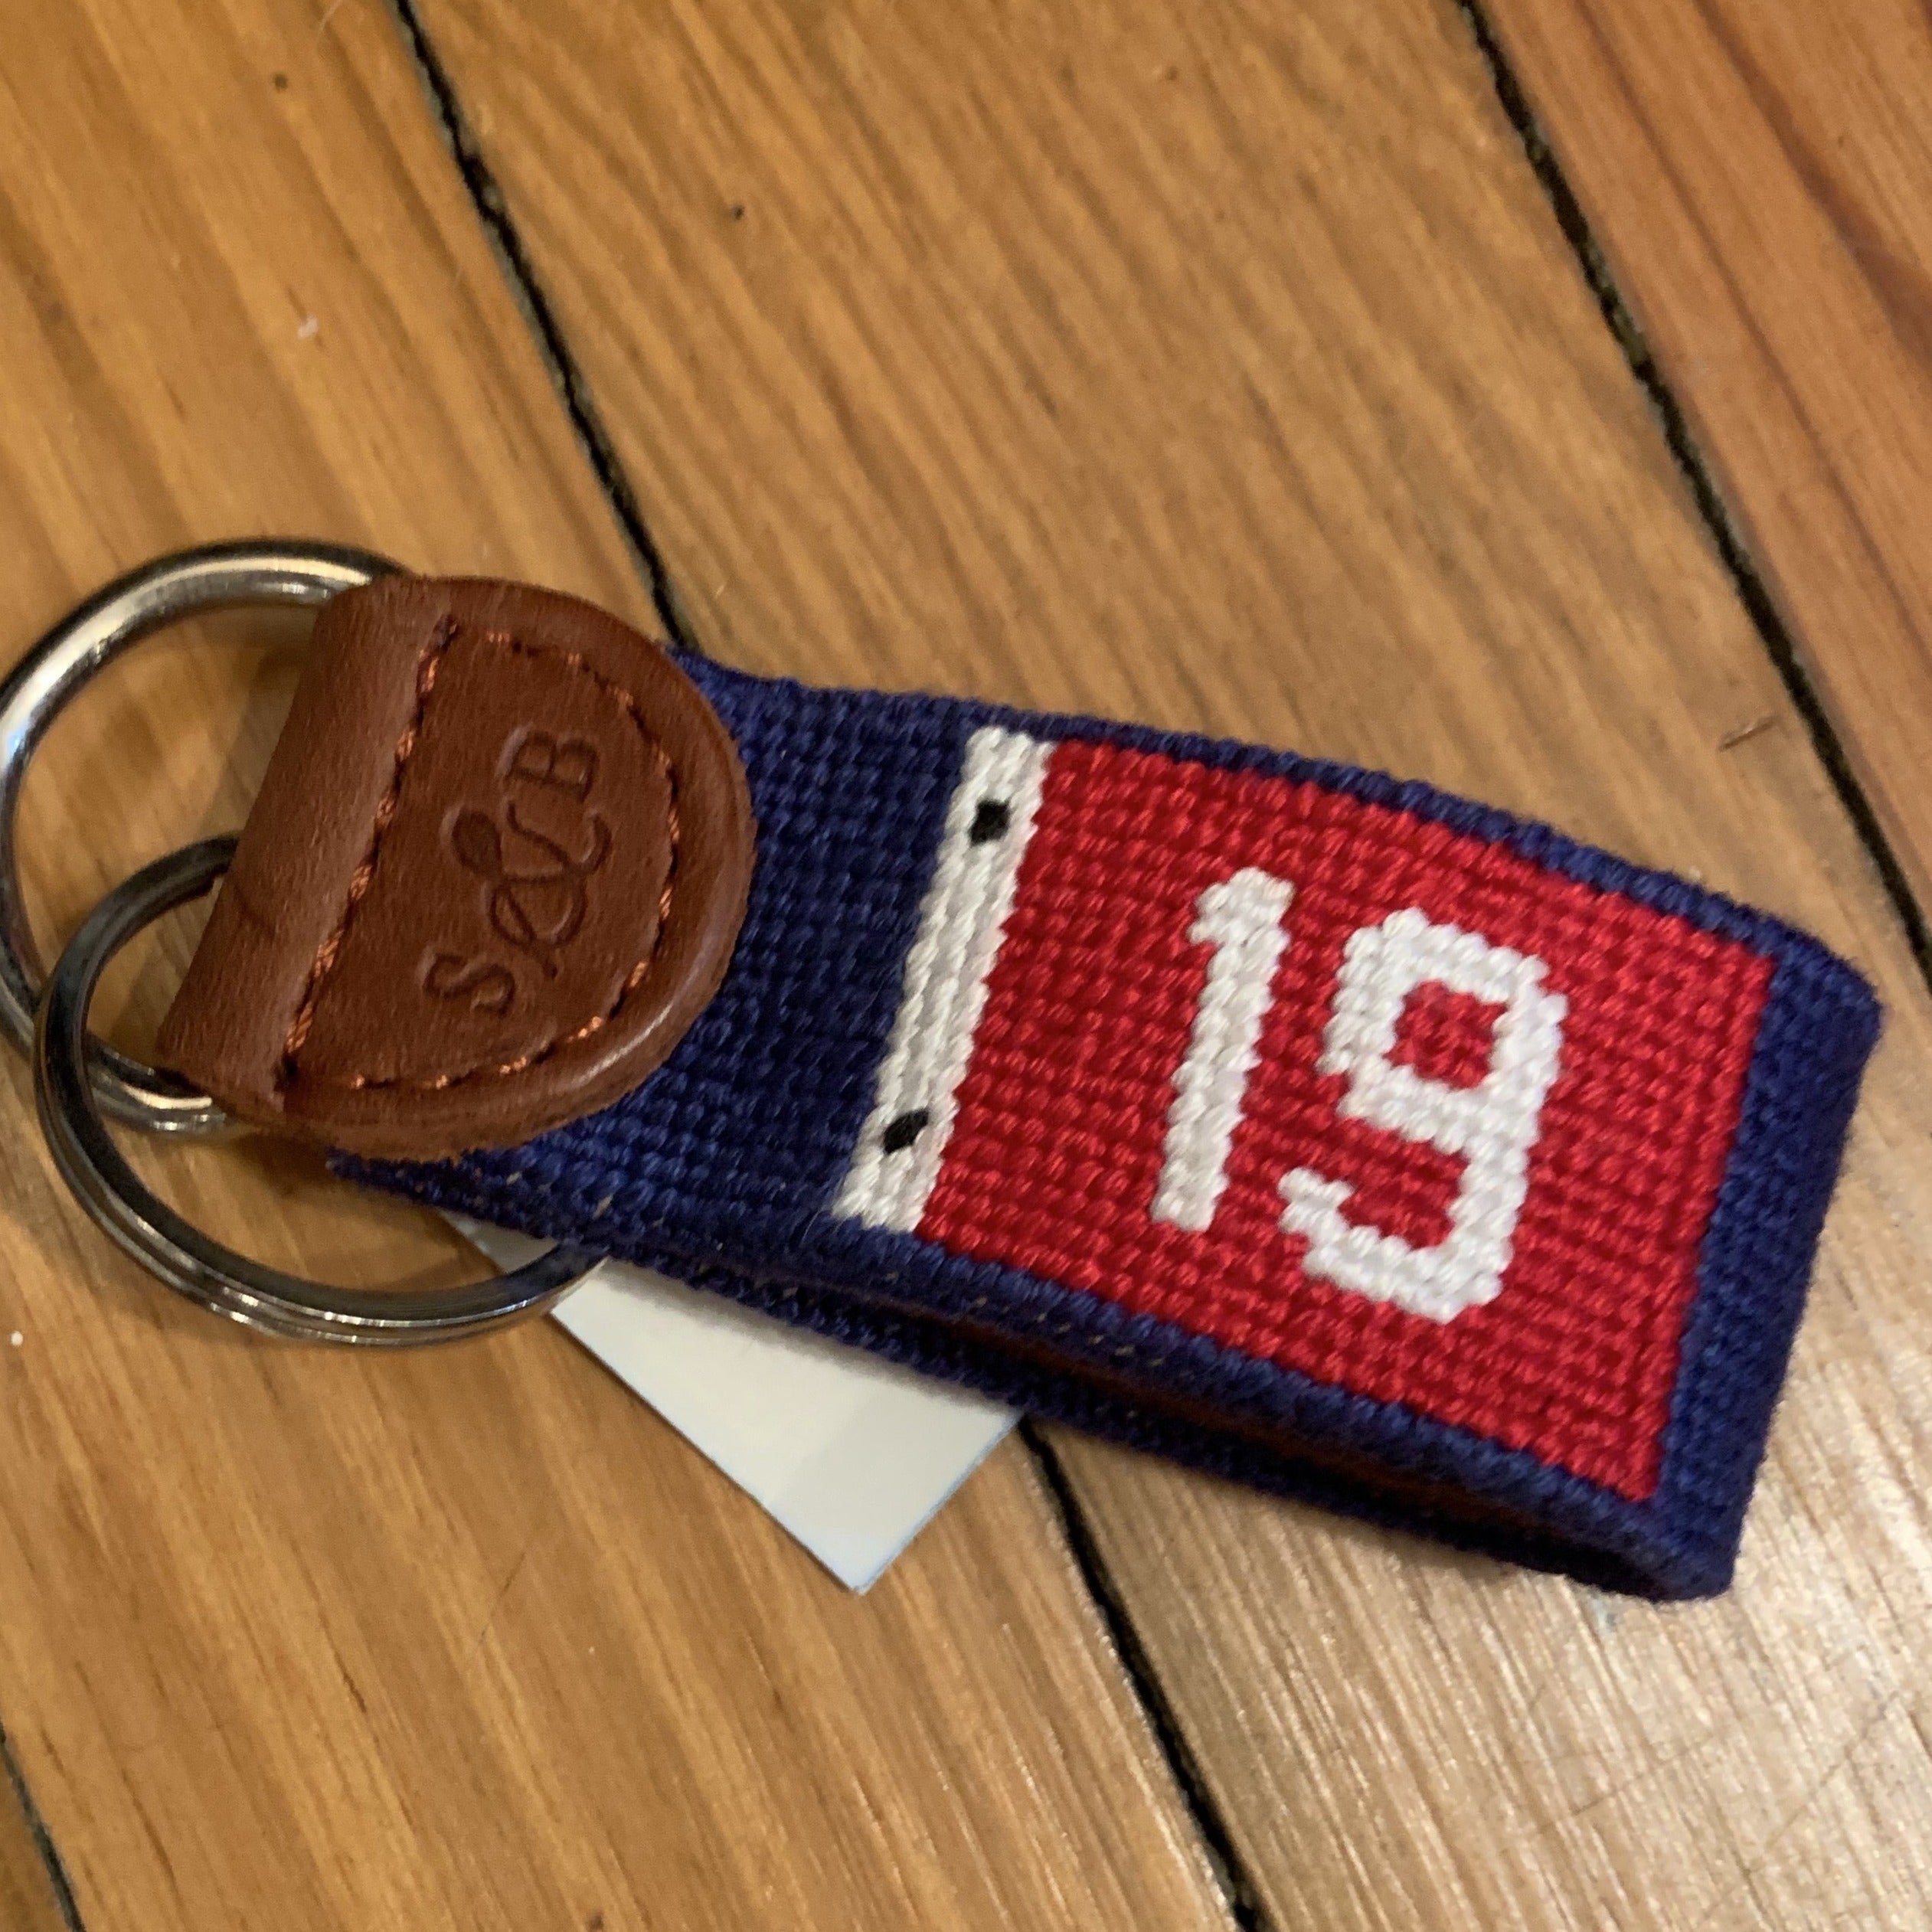 19th hole smathers and branson key chain